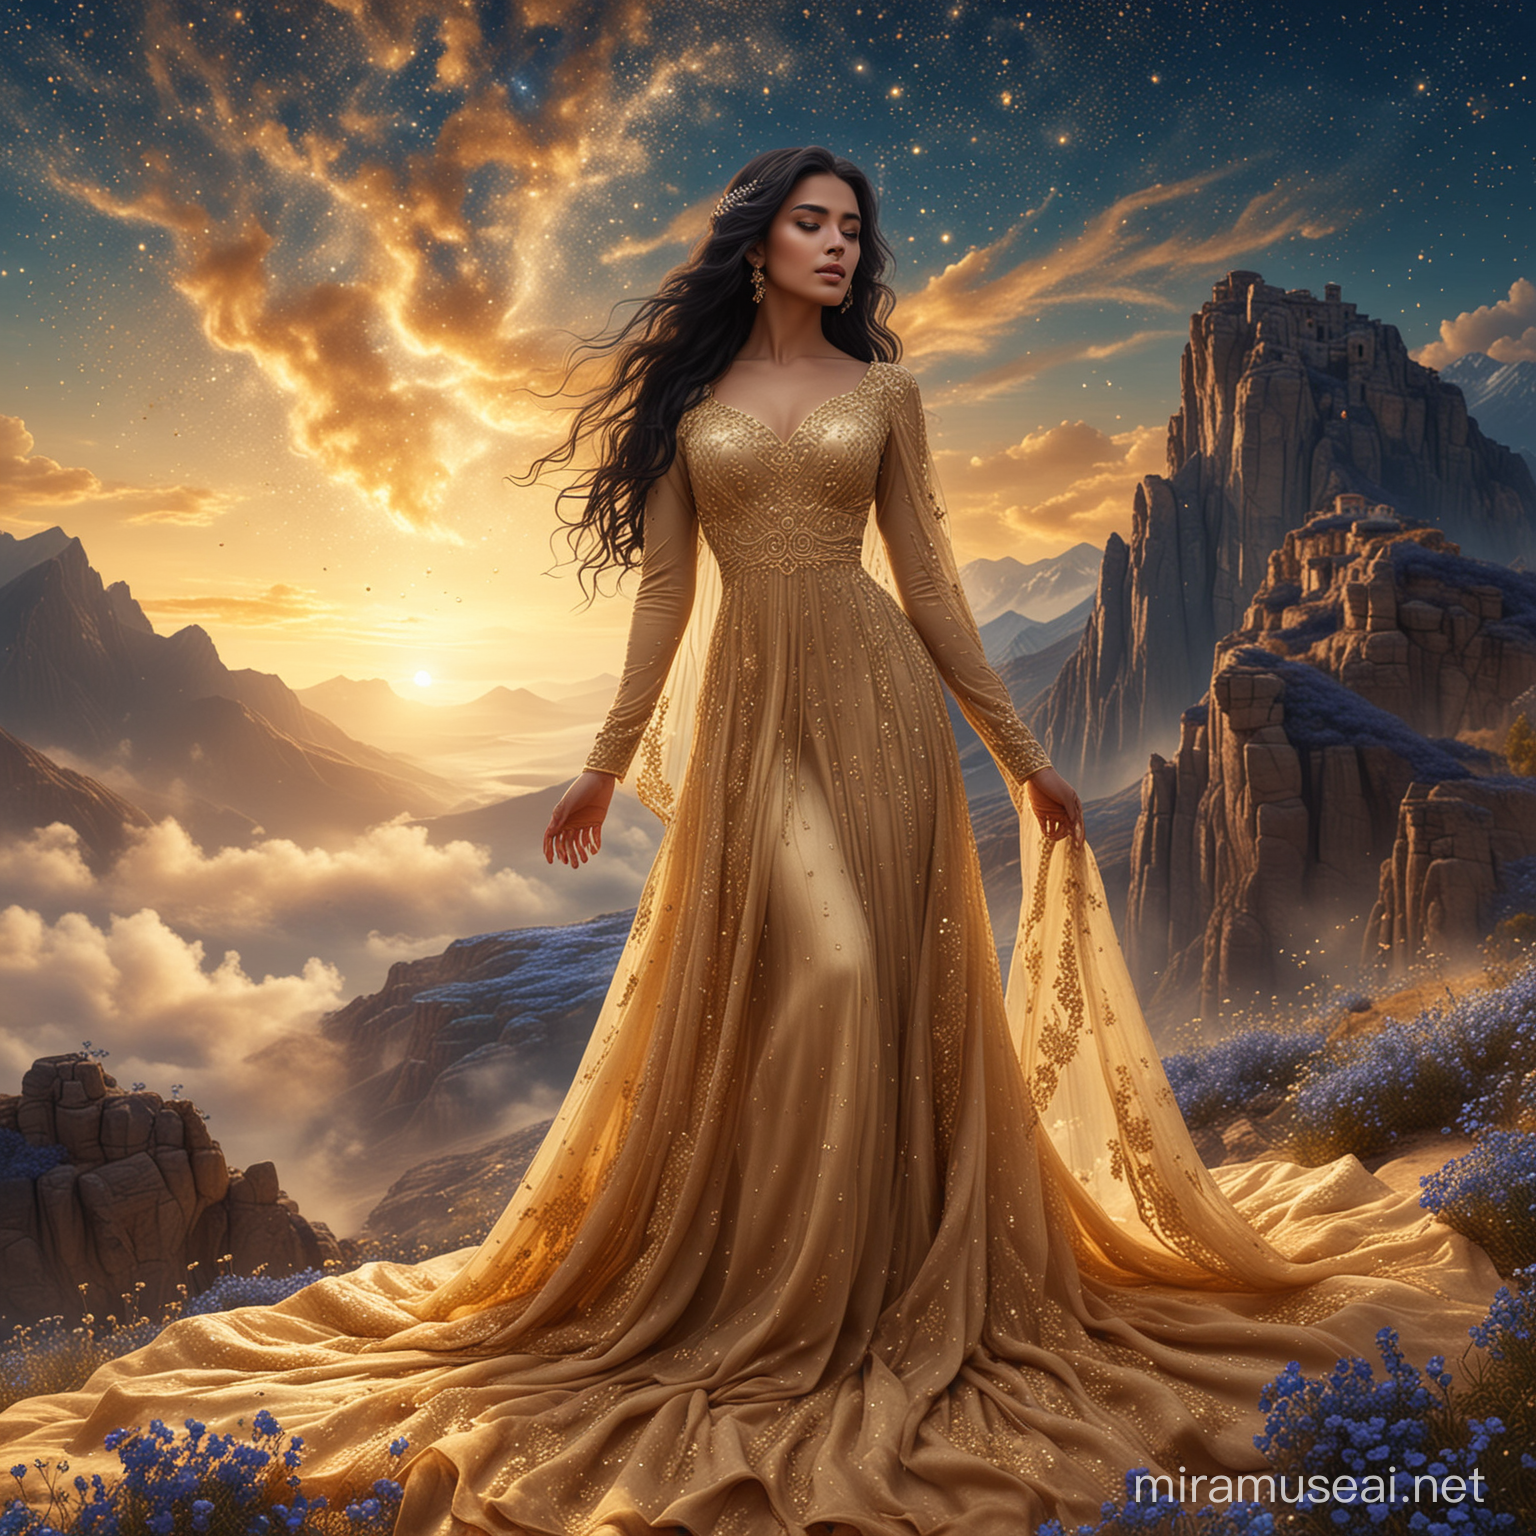 A beautiful woman, standing up on a mountain of golden dust, in a dreamy land, surrounded by golden dust and small dark blue flowers. Long wavy black hair. Elegant long beige dress,embroidering bridal veil, haute couture, sari tissu. Background nebula sky with golden light. 8k, fantasy, illustration, digital art, illustration art, fantasy art, fantasy styl